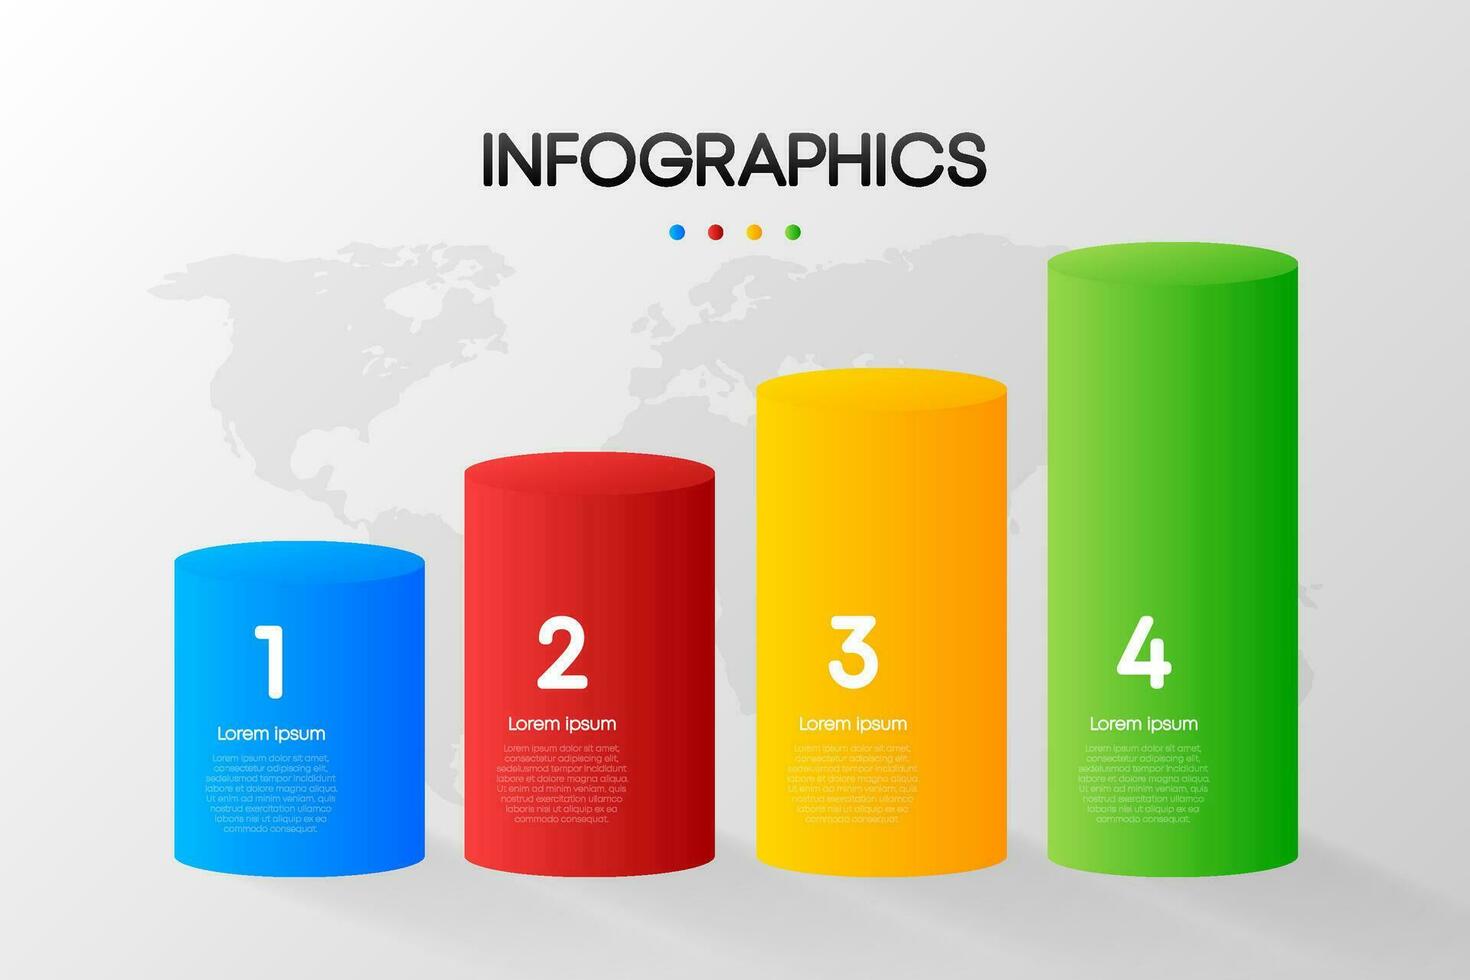 Business infographic, data visualization. Square frame. Simple infographic design template. Vector illustration.